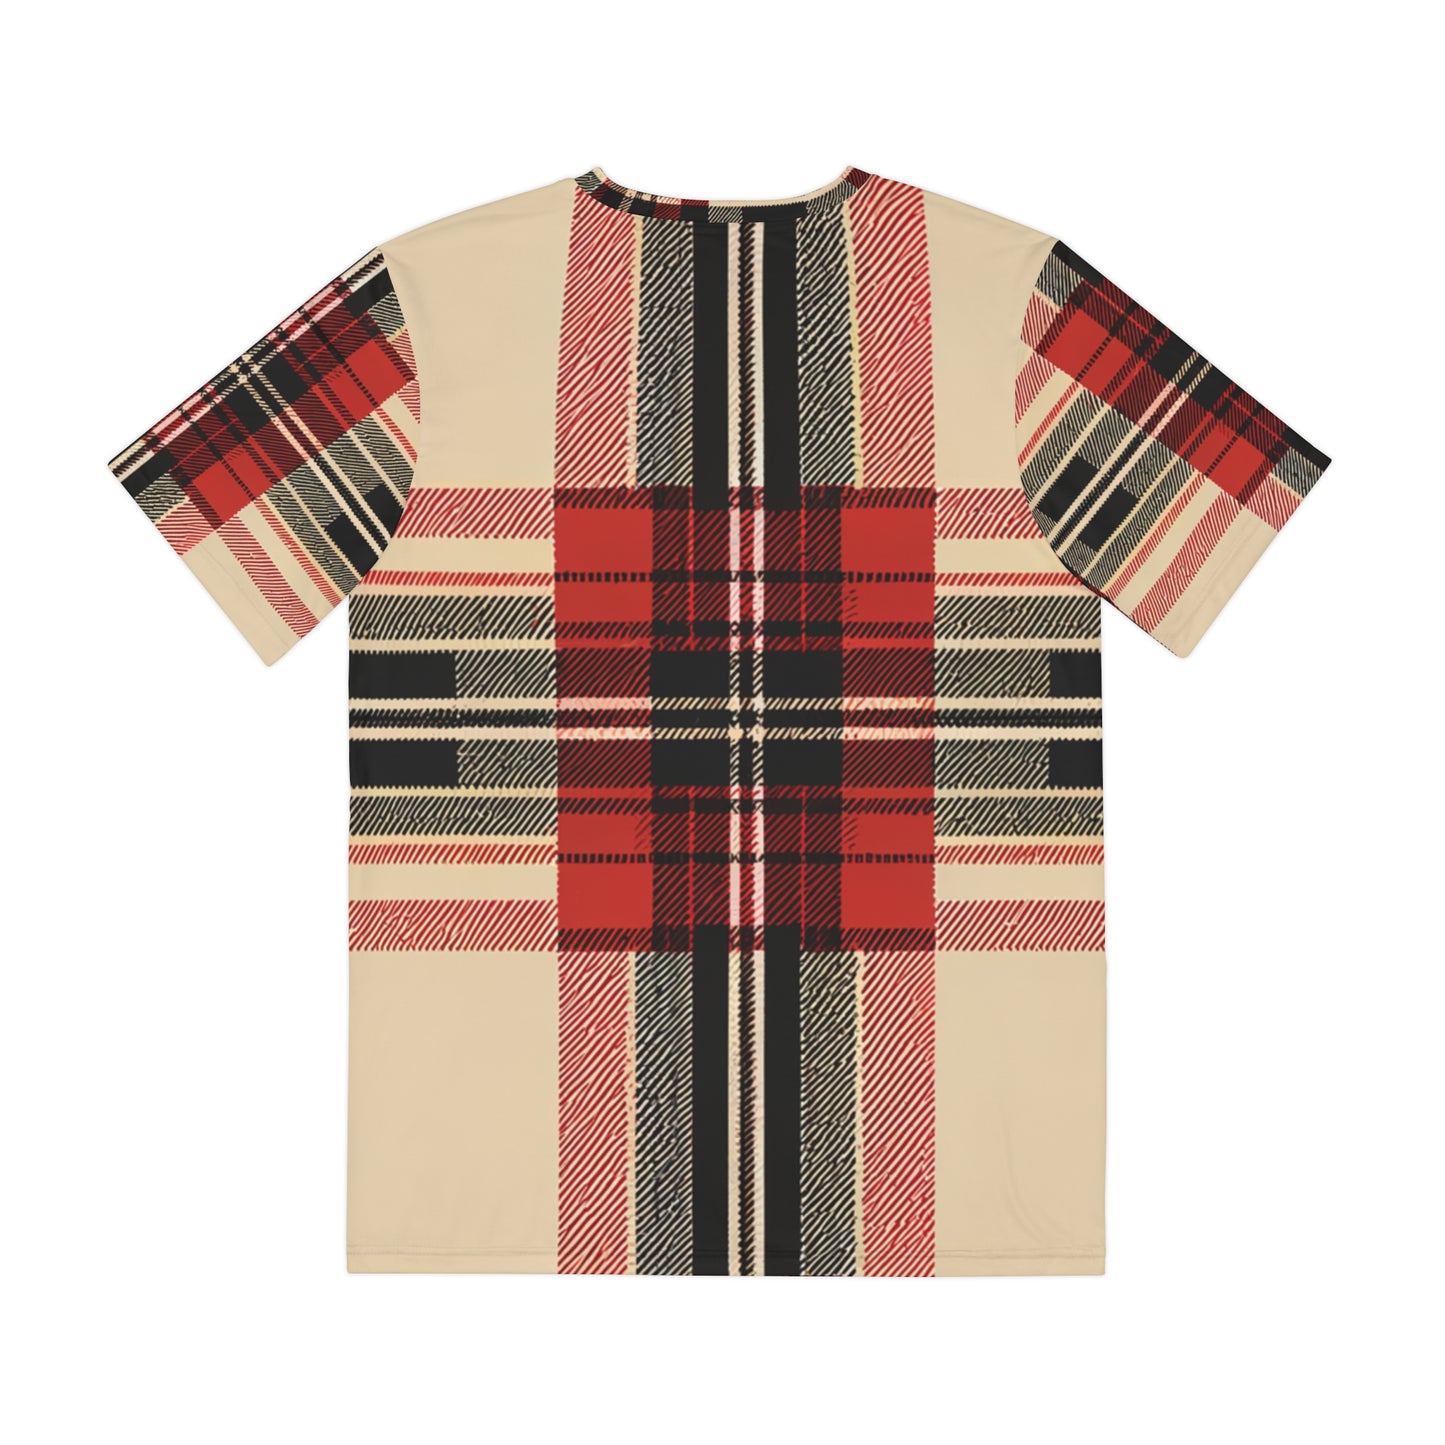 Back view of the Autumn Elegance Tartan Crewneck Pullover All-Over Print Short-Sleeved Shirt red black and beige background plaid pattern